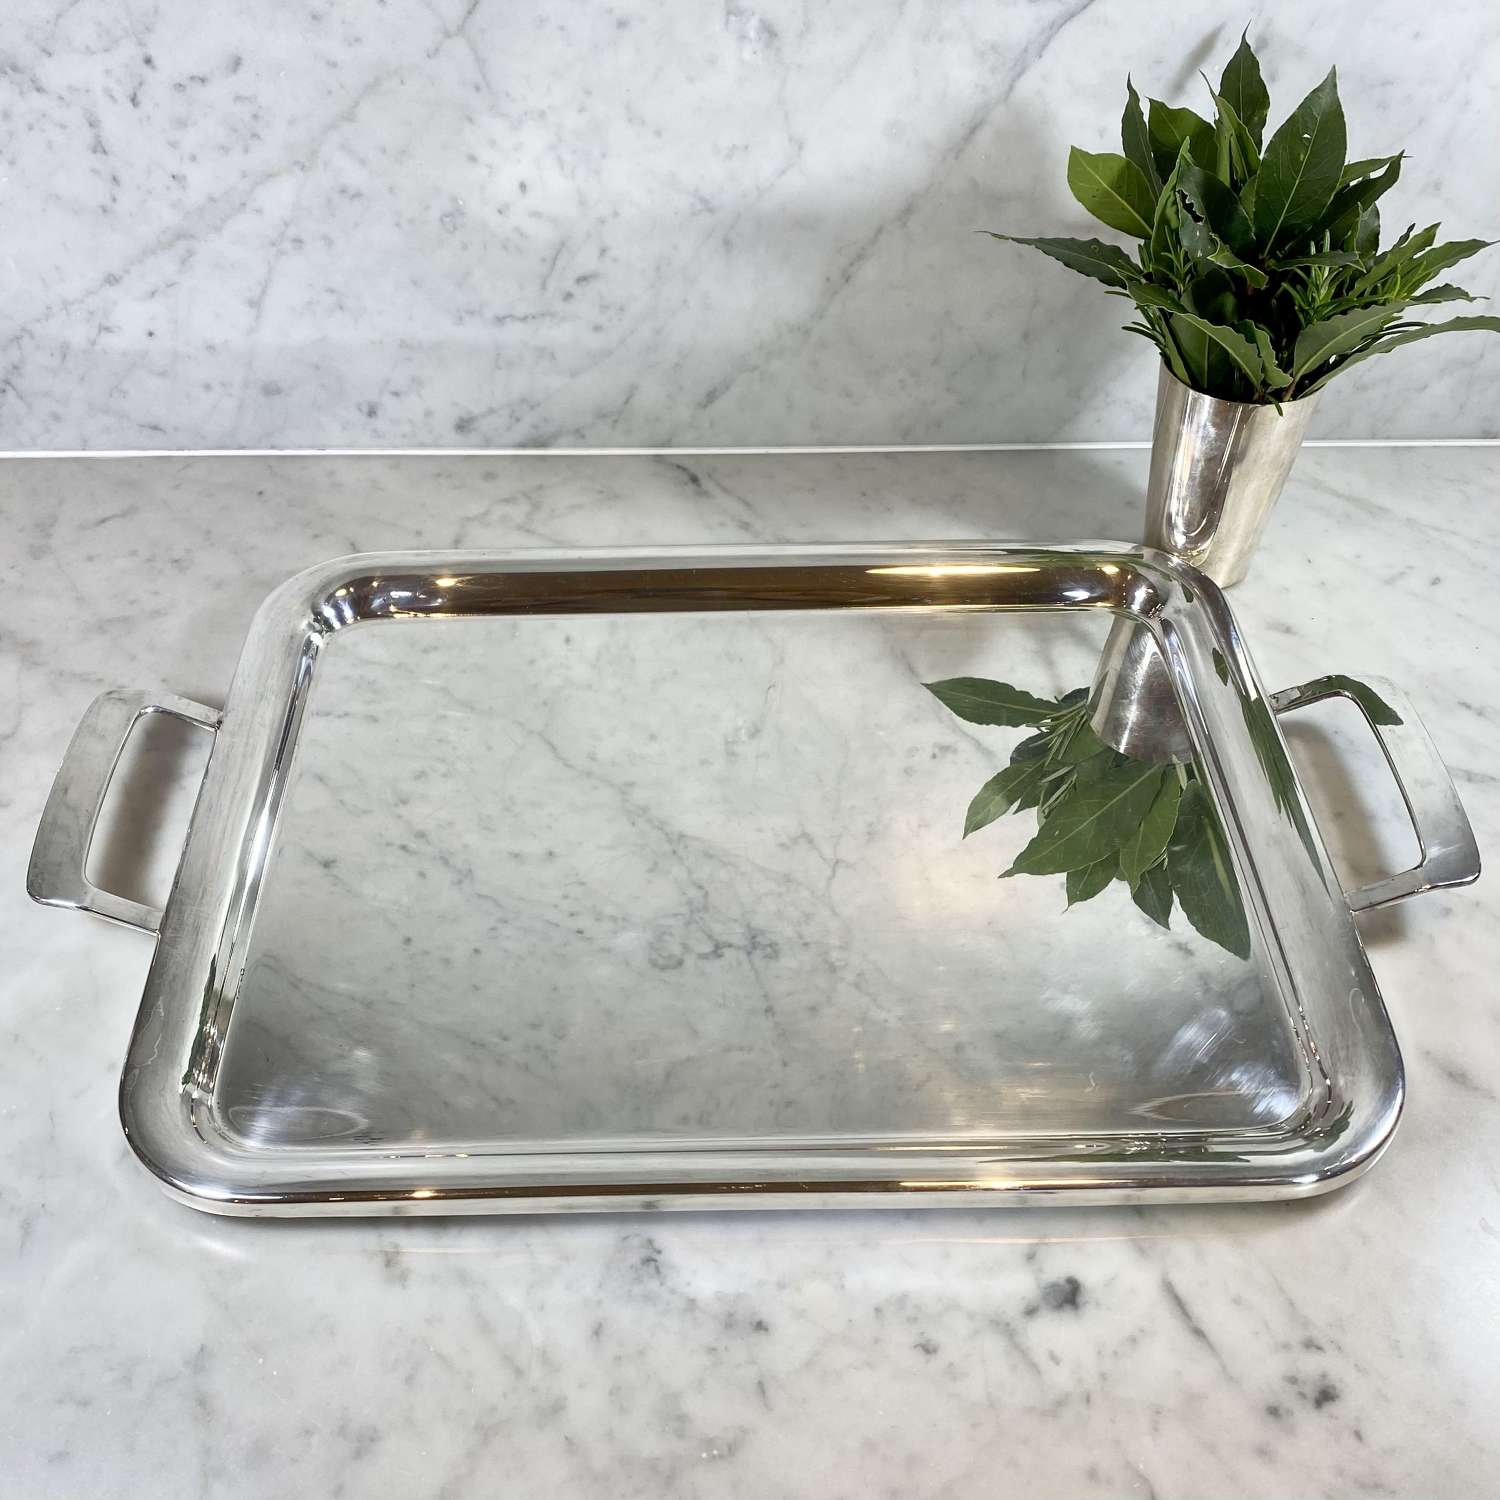 Good quality medium sized Mid 20th Century silver plated serving tray